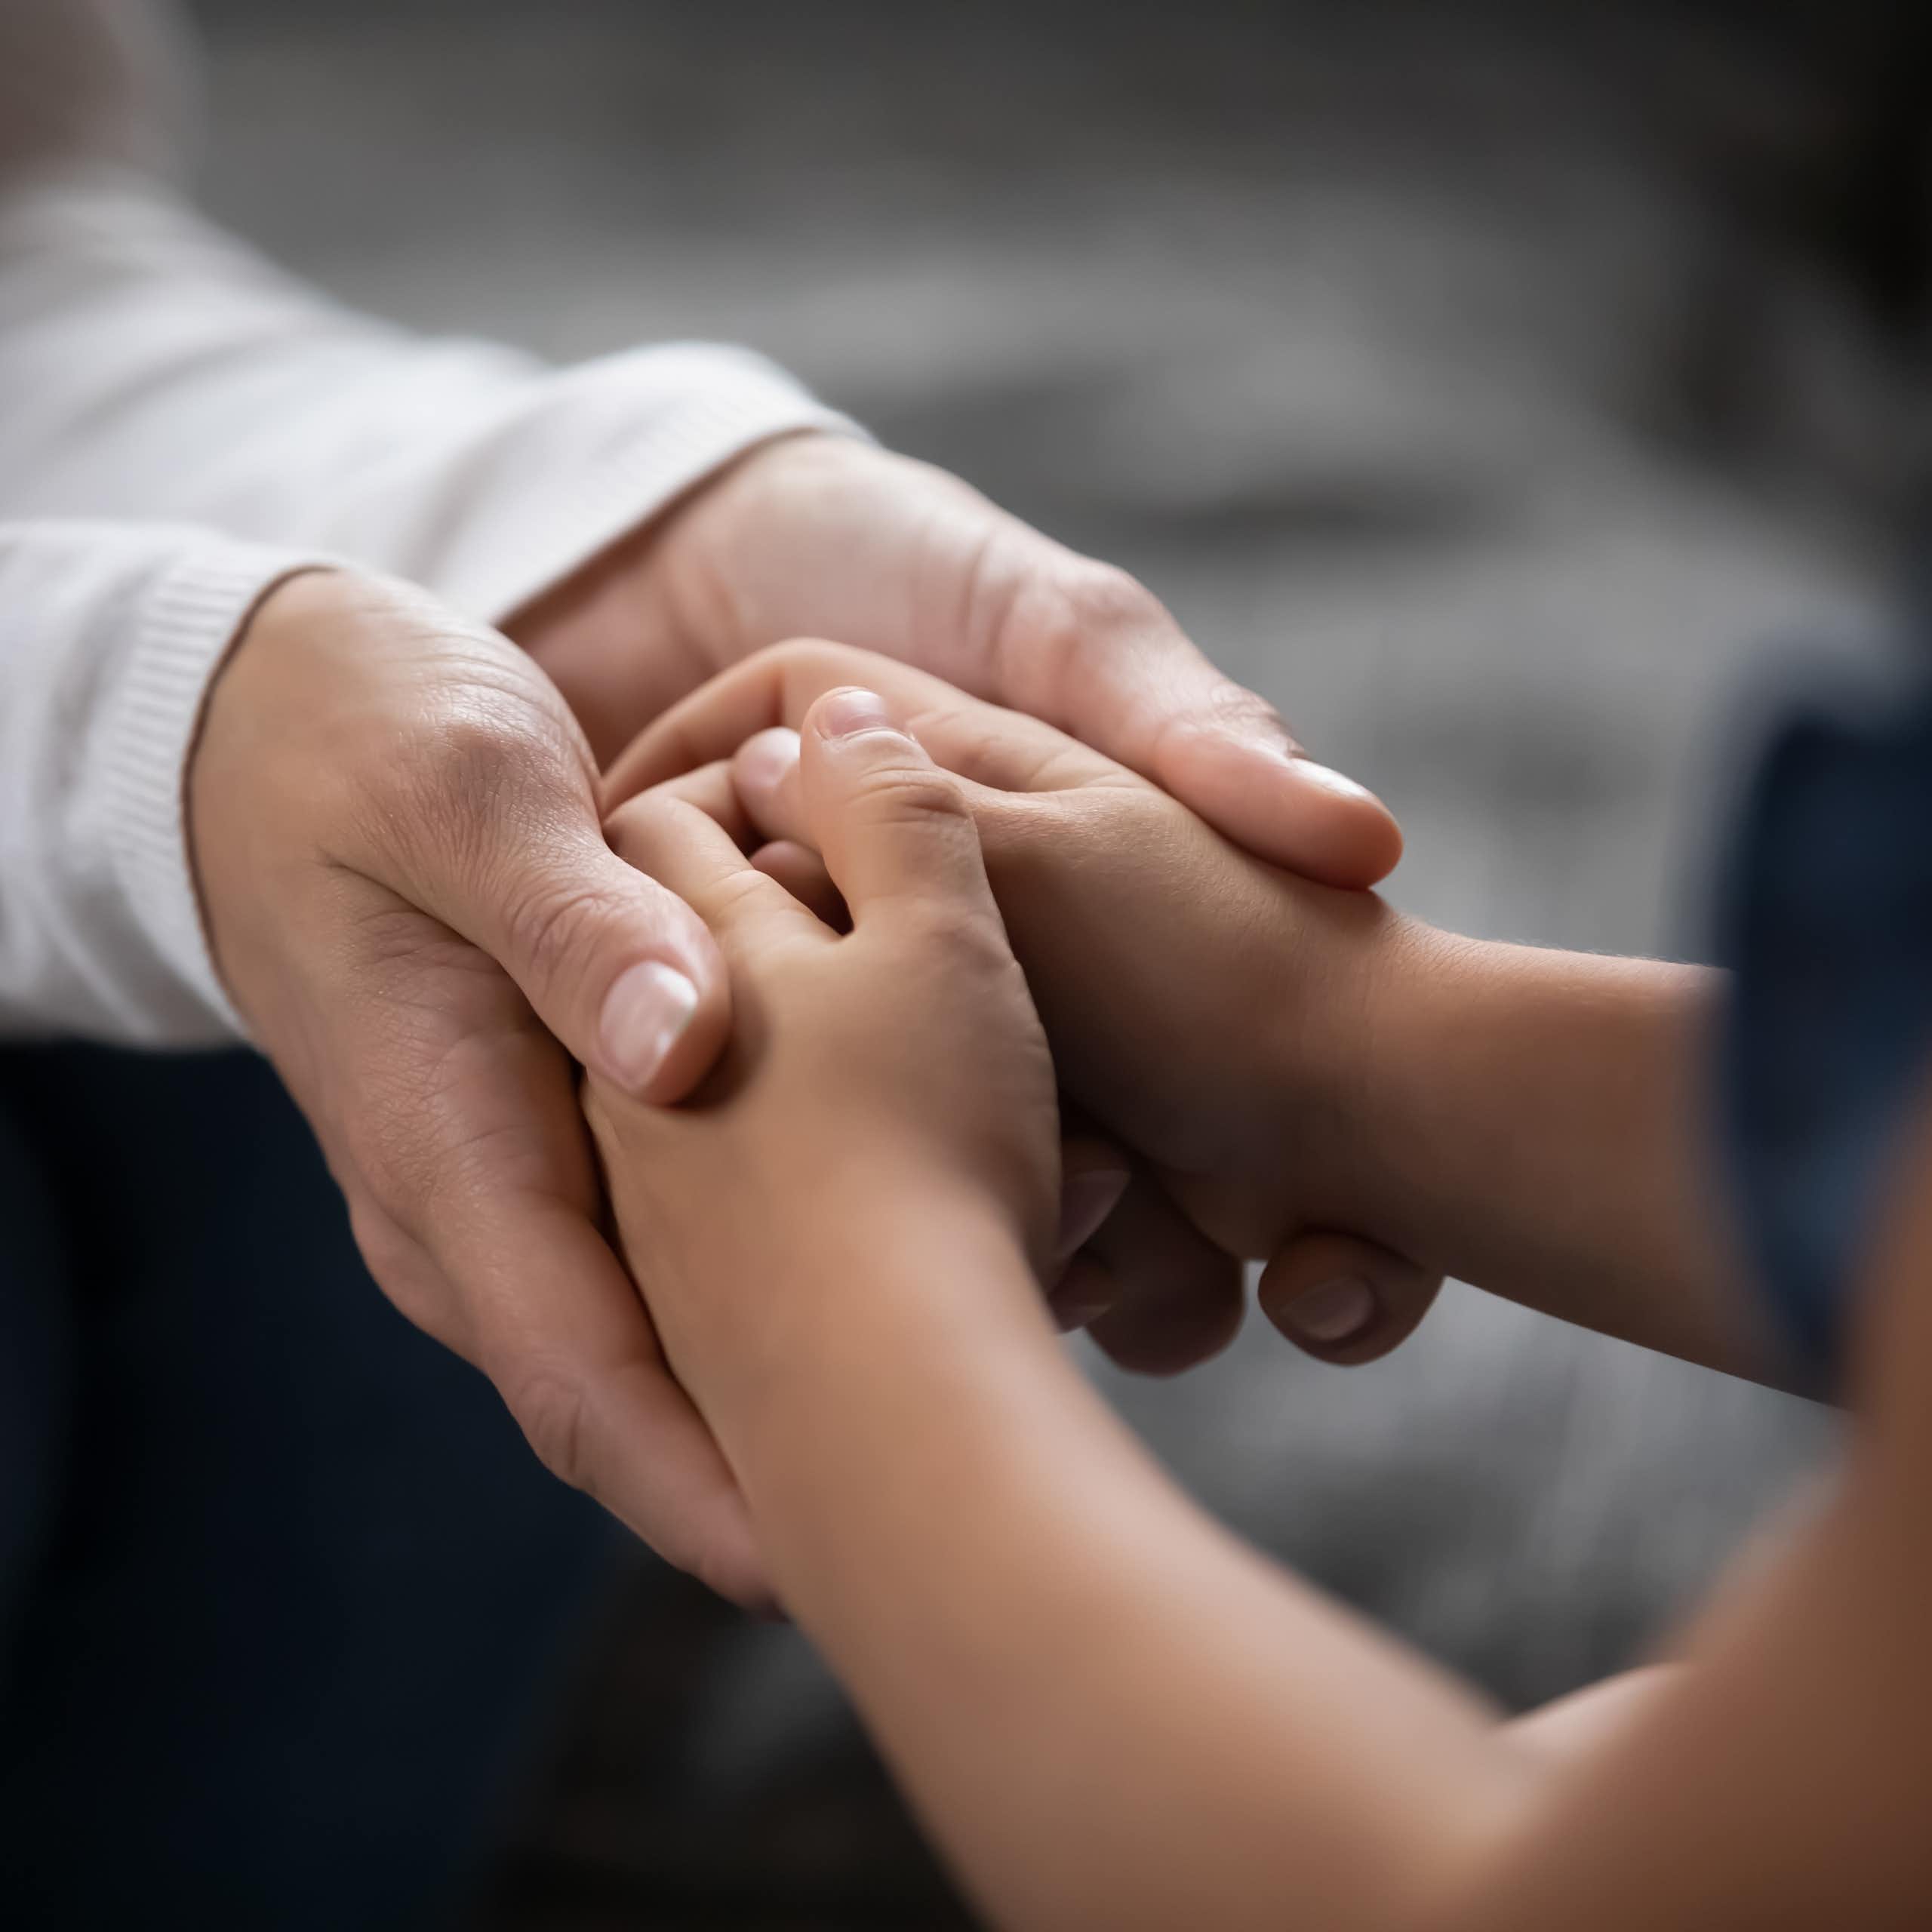 Adult hands holding a child's hands